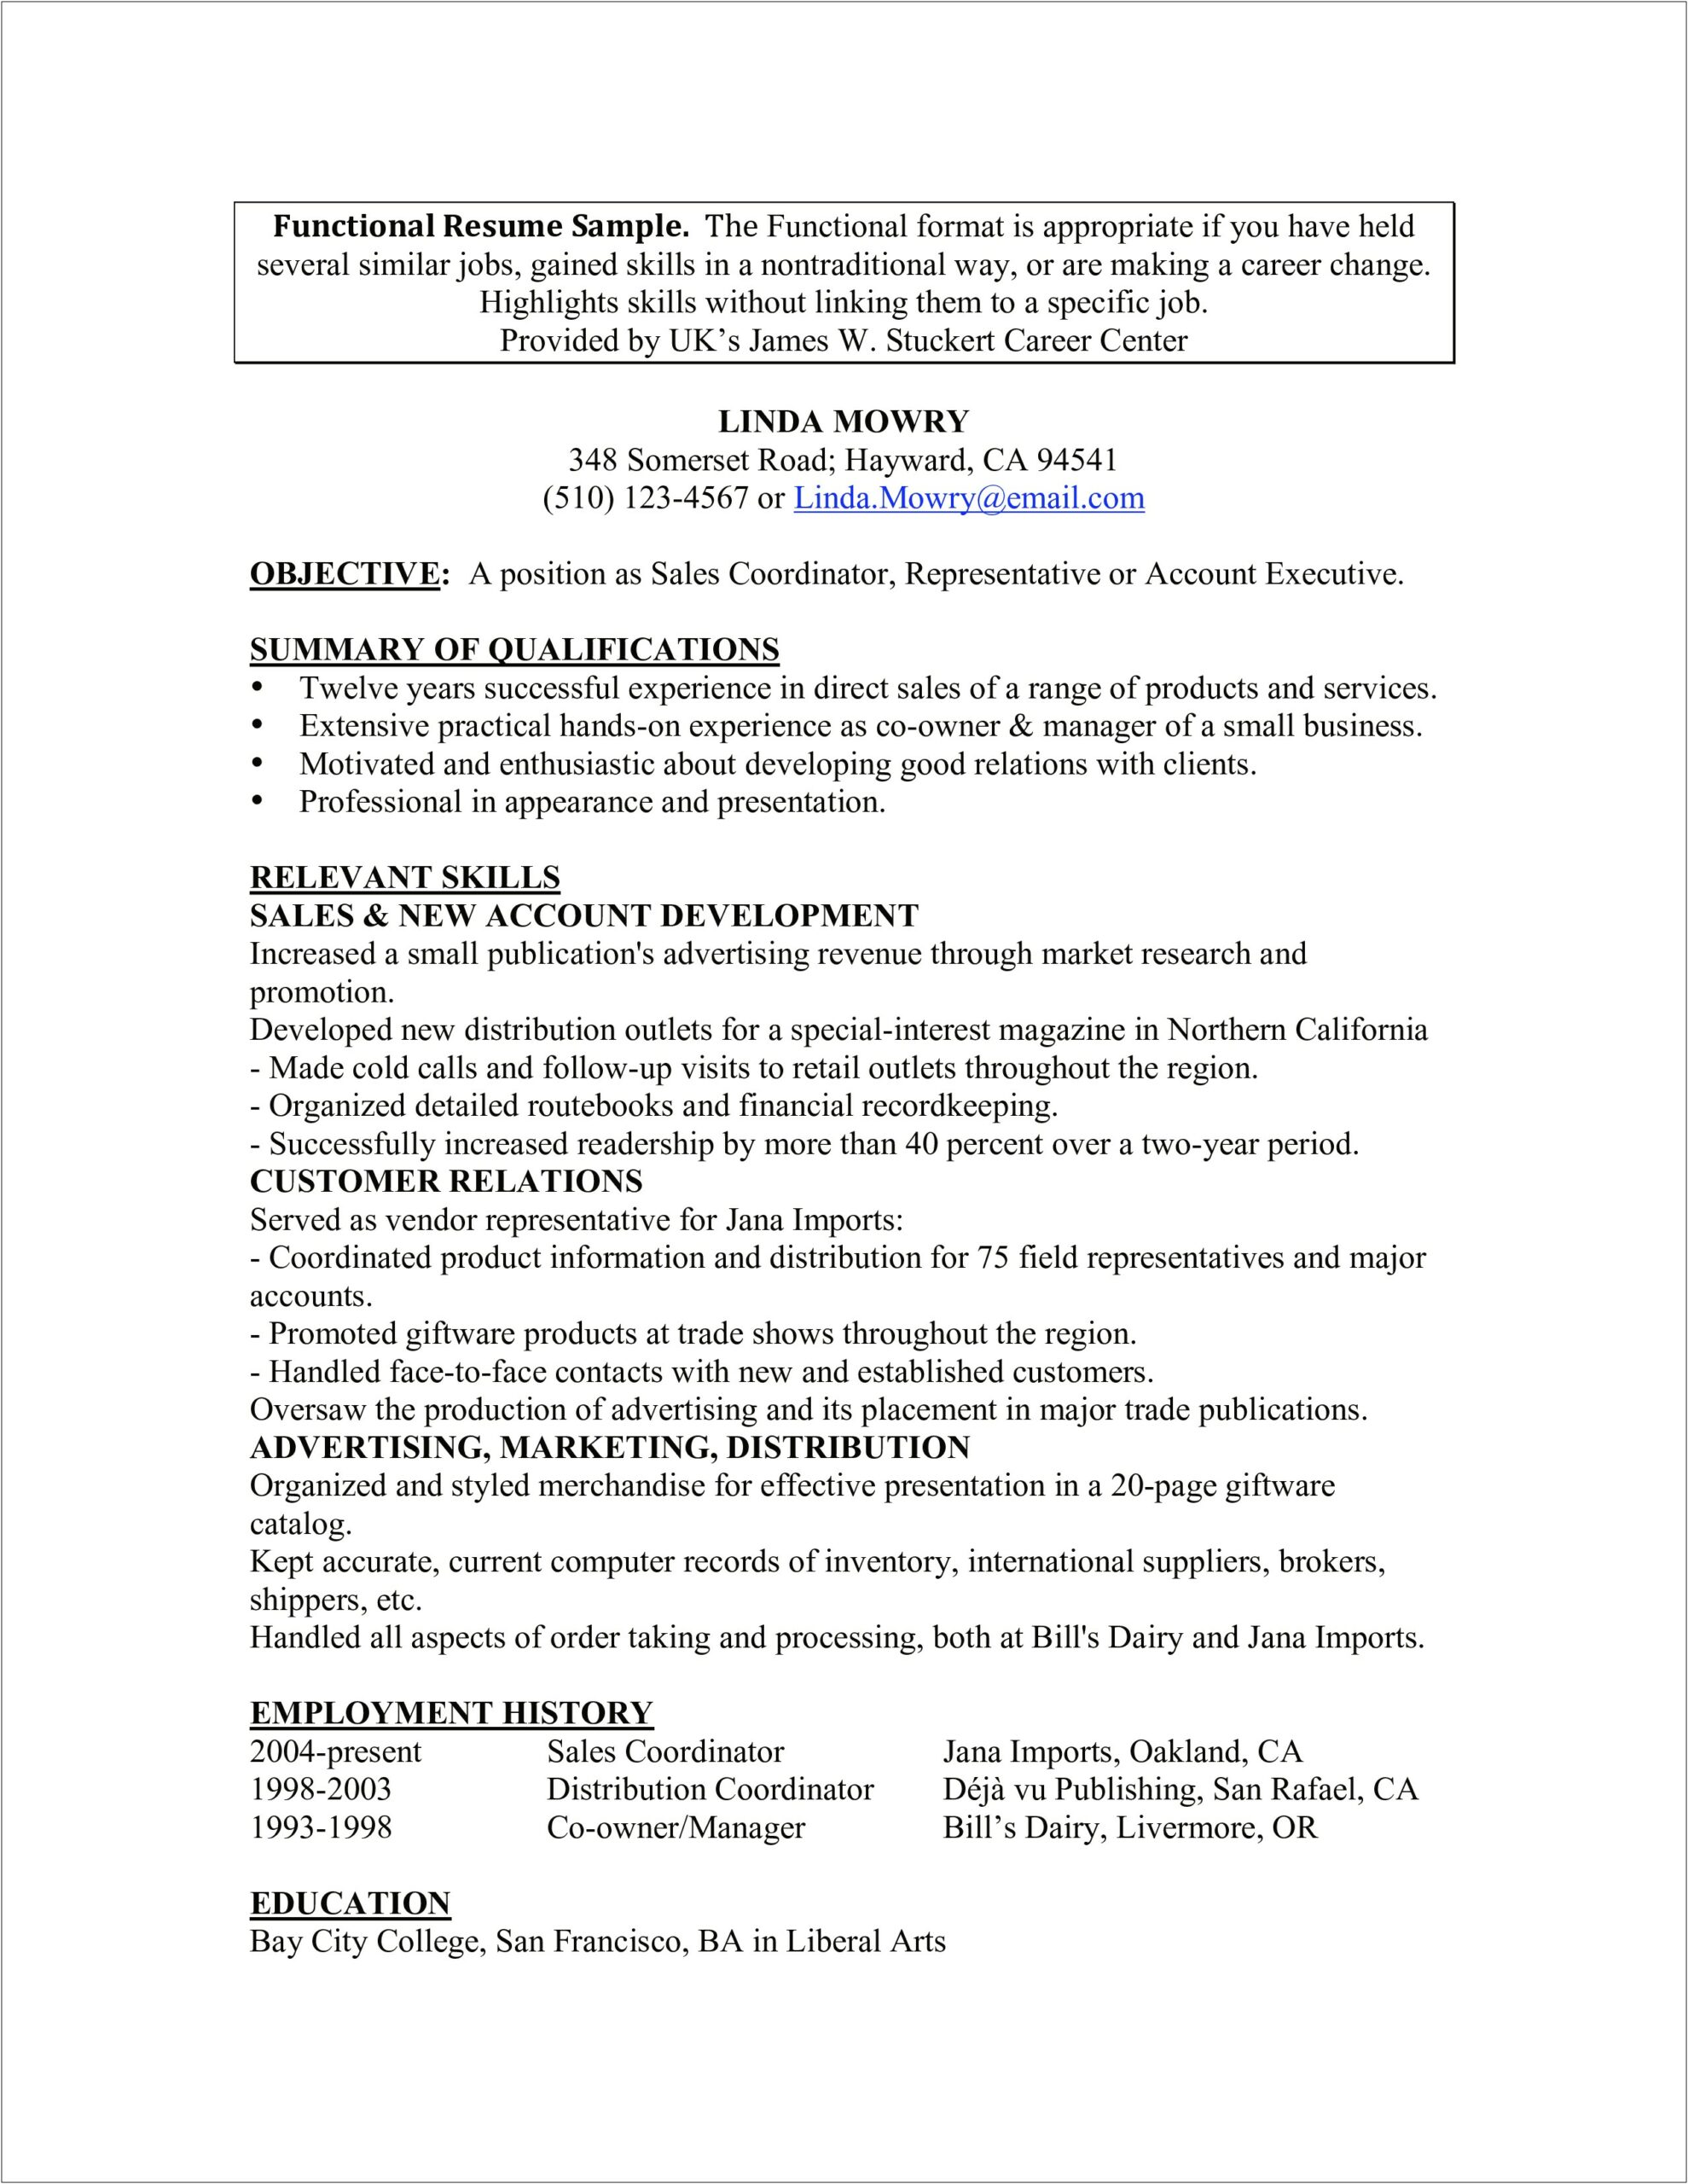 Resume Example For Young Sales Person